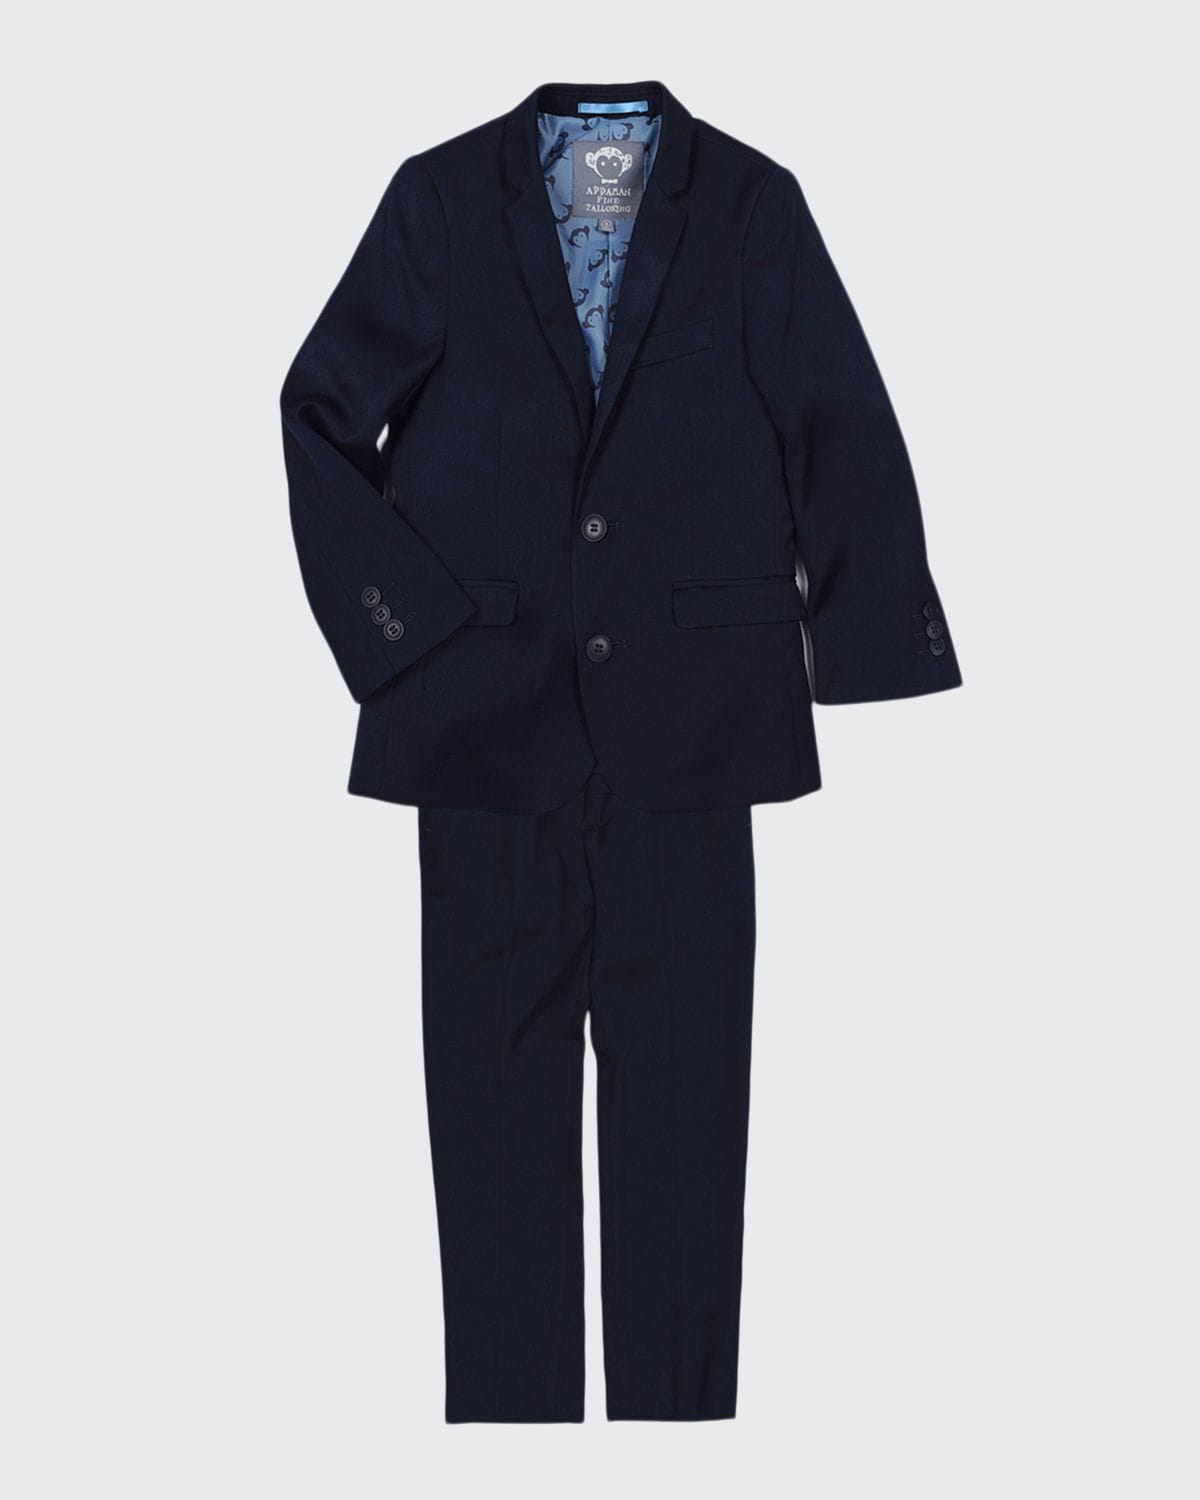 Appaman Boys' Two-Piece Mod Suit, Navy, Size 16